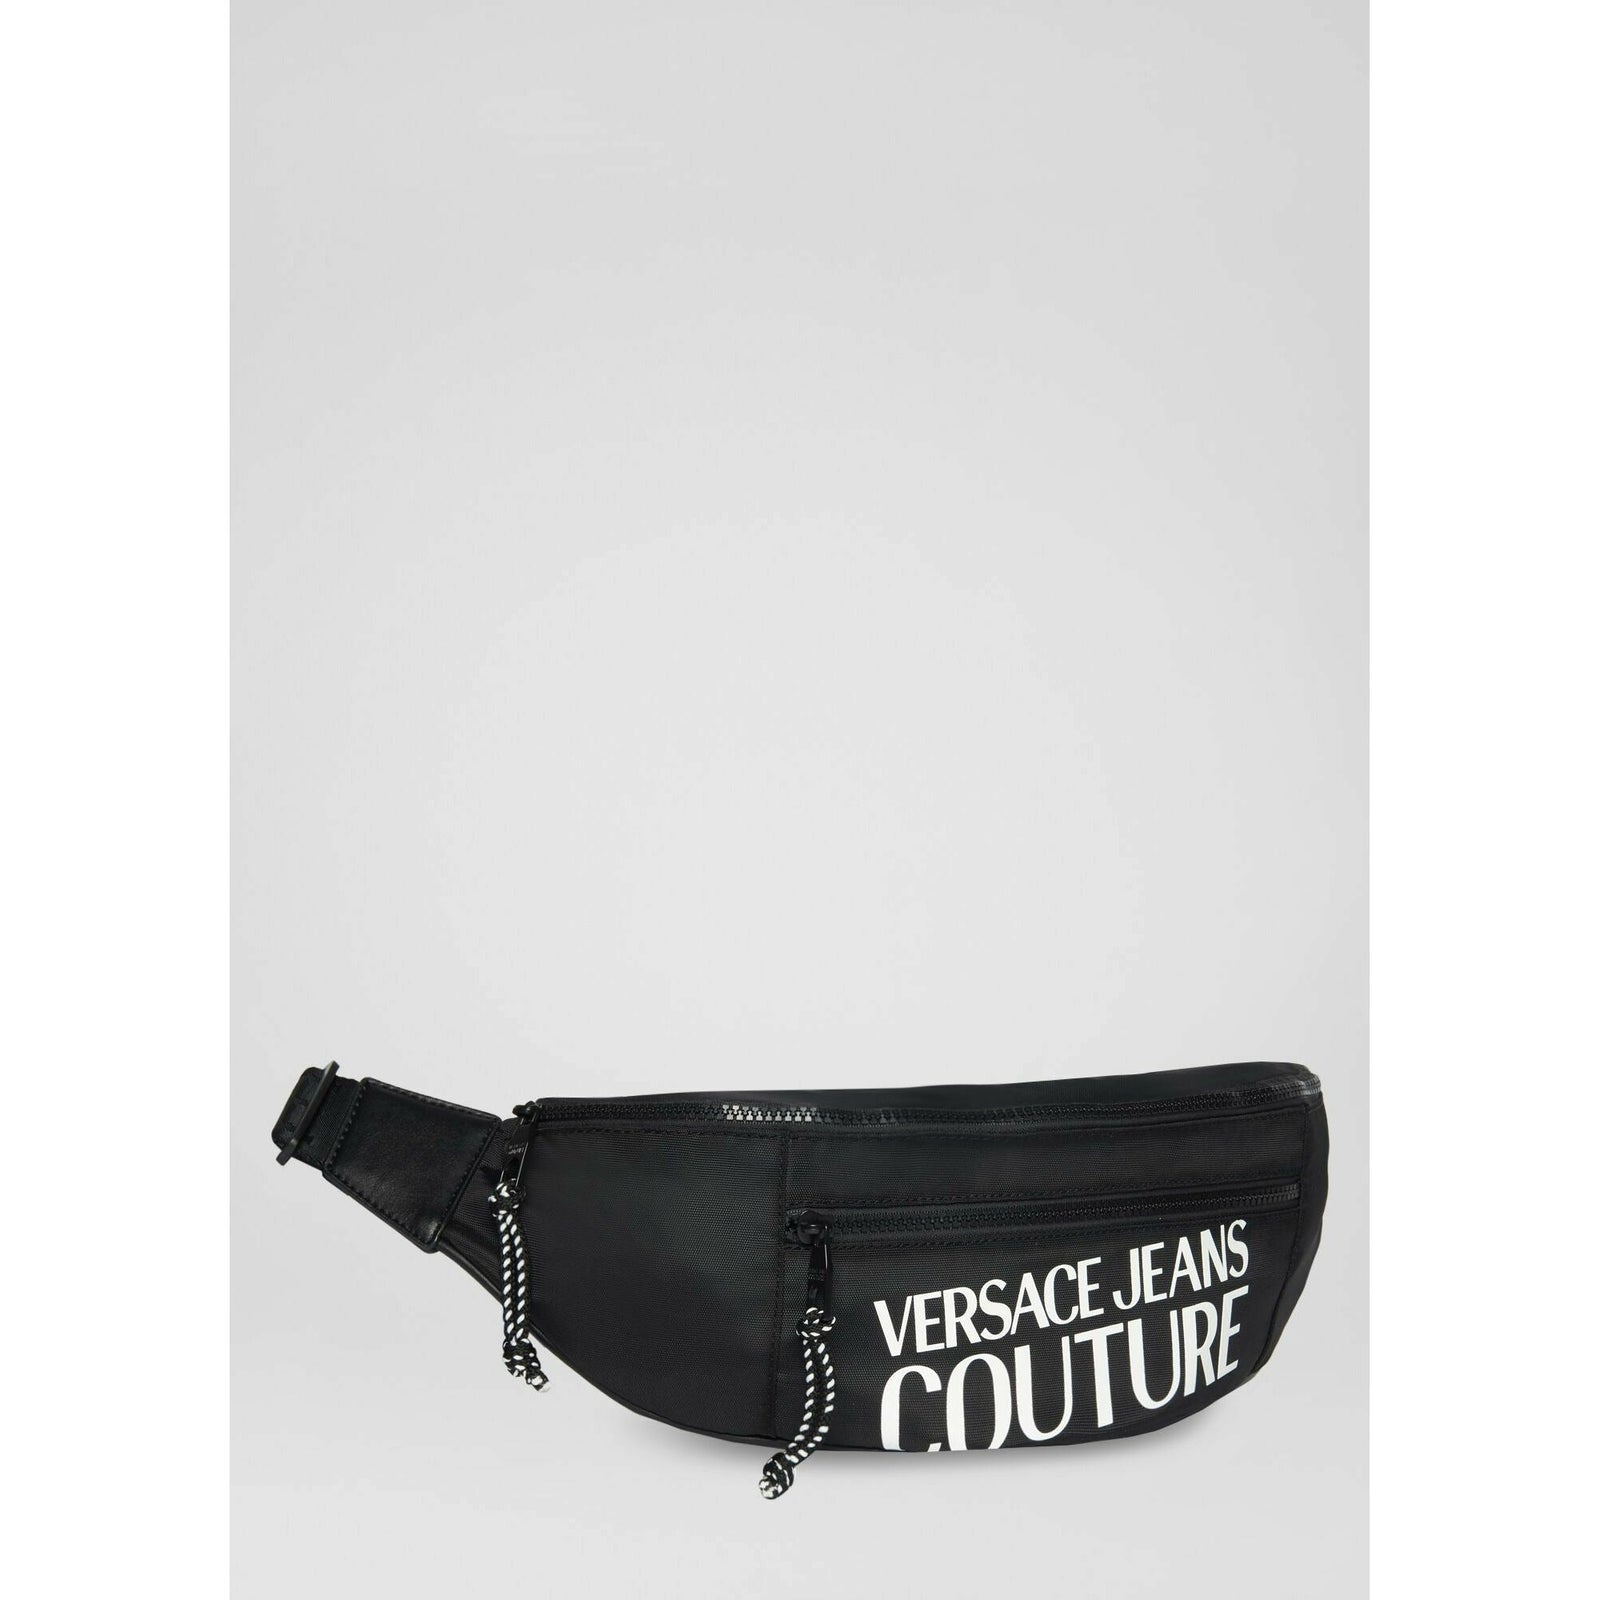 VERSACE JEANS COUTURE BAGS - Yooto